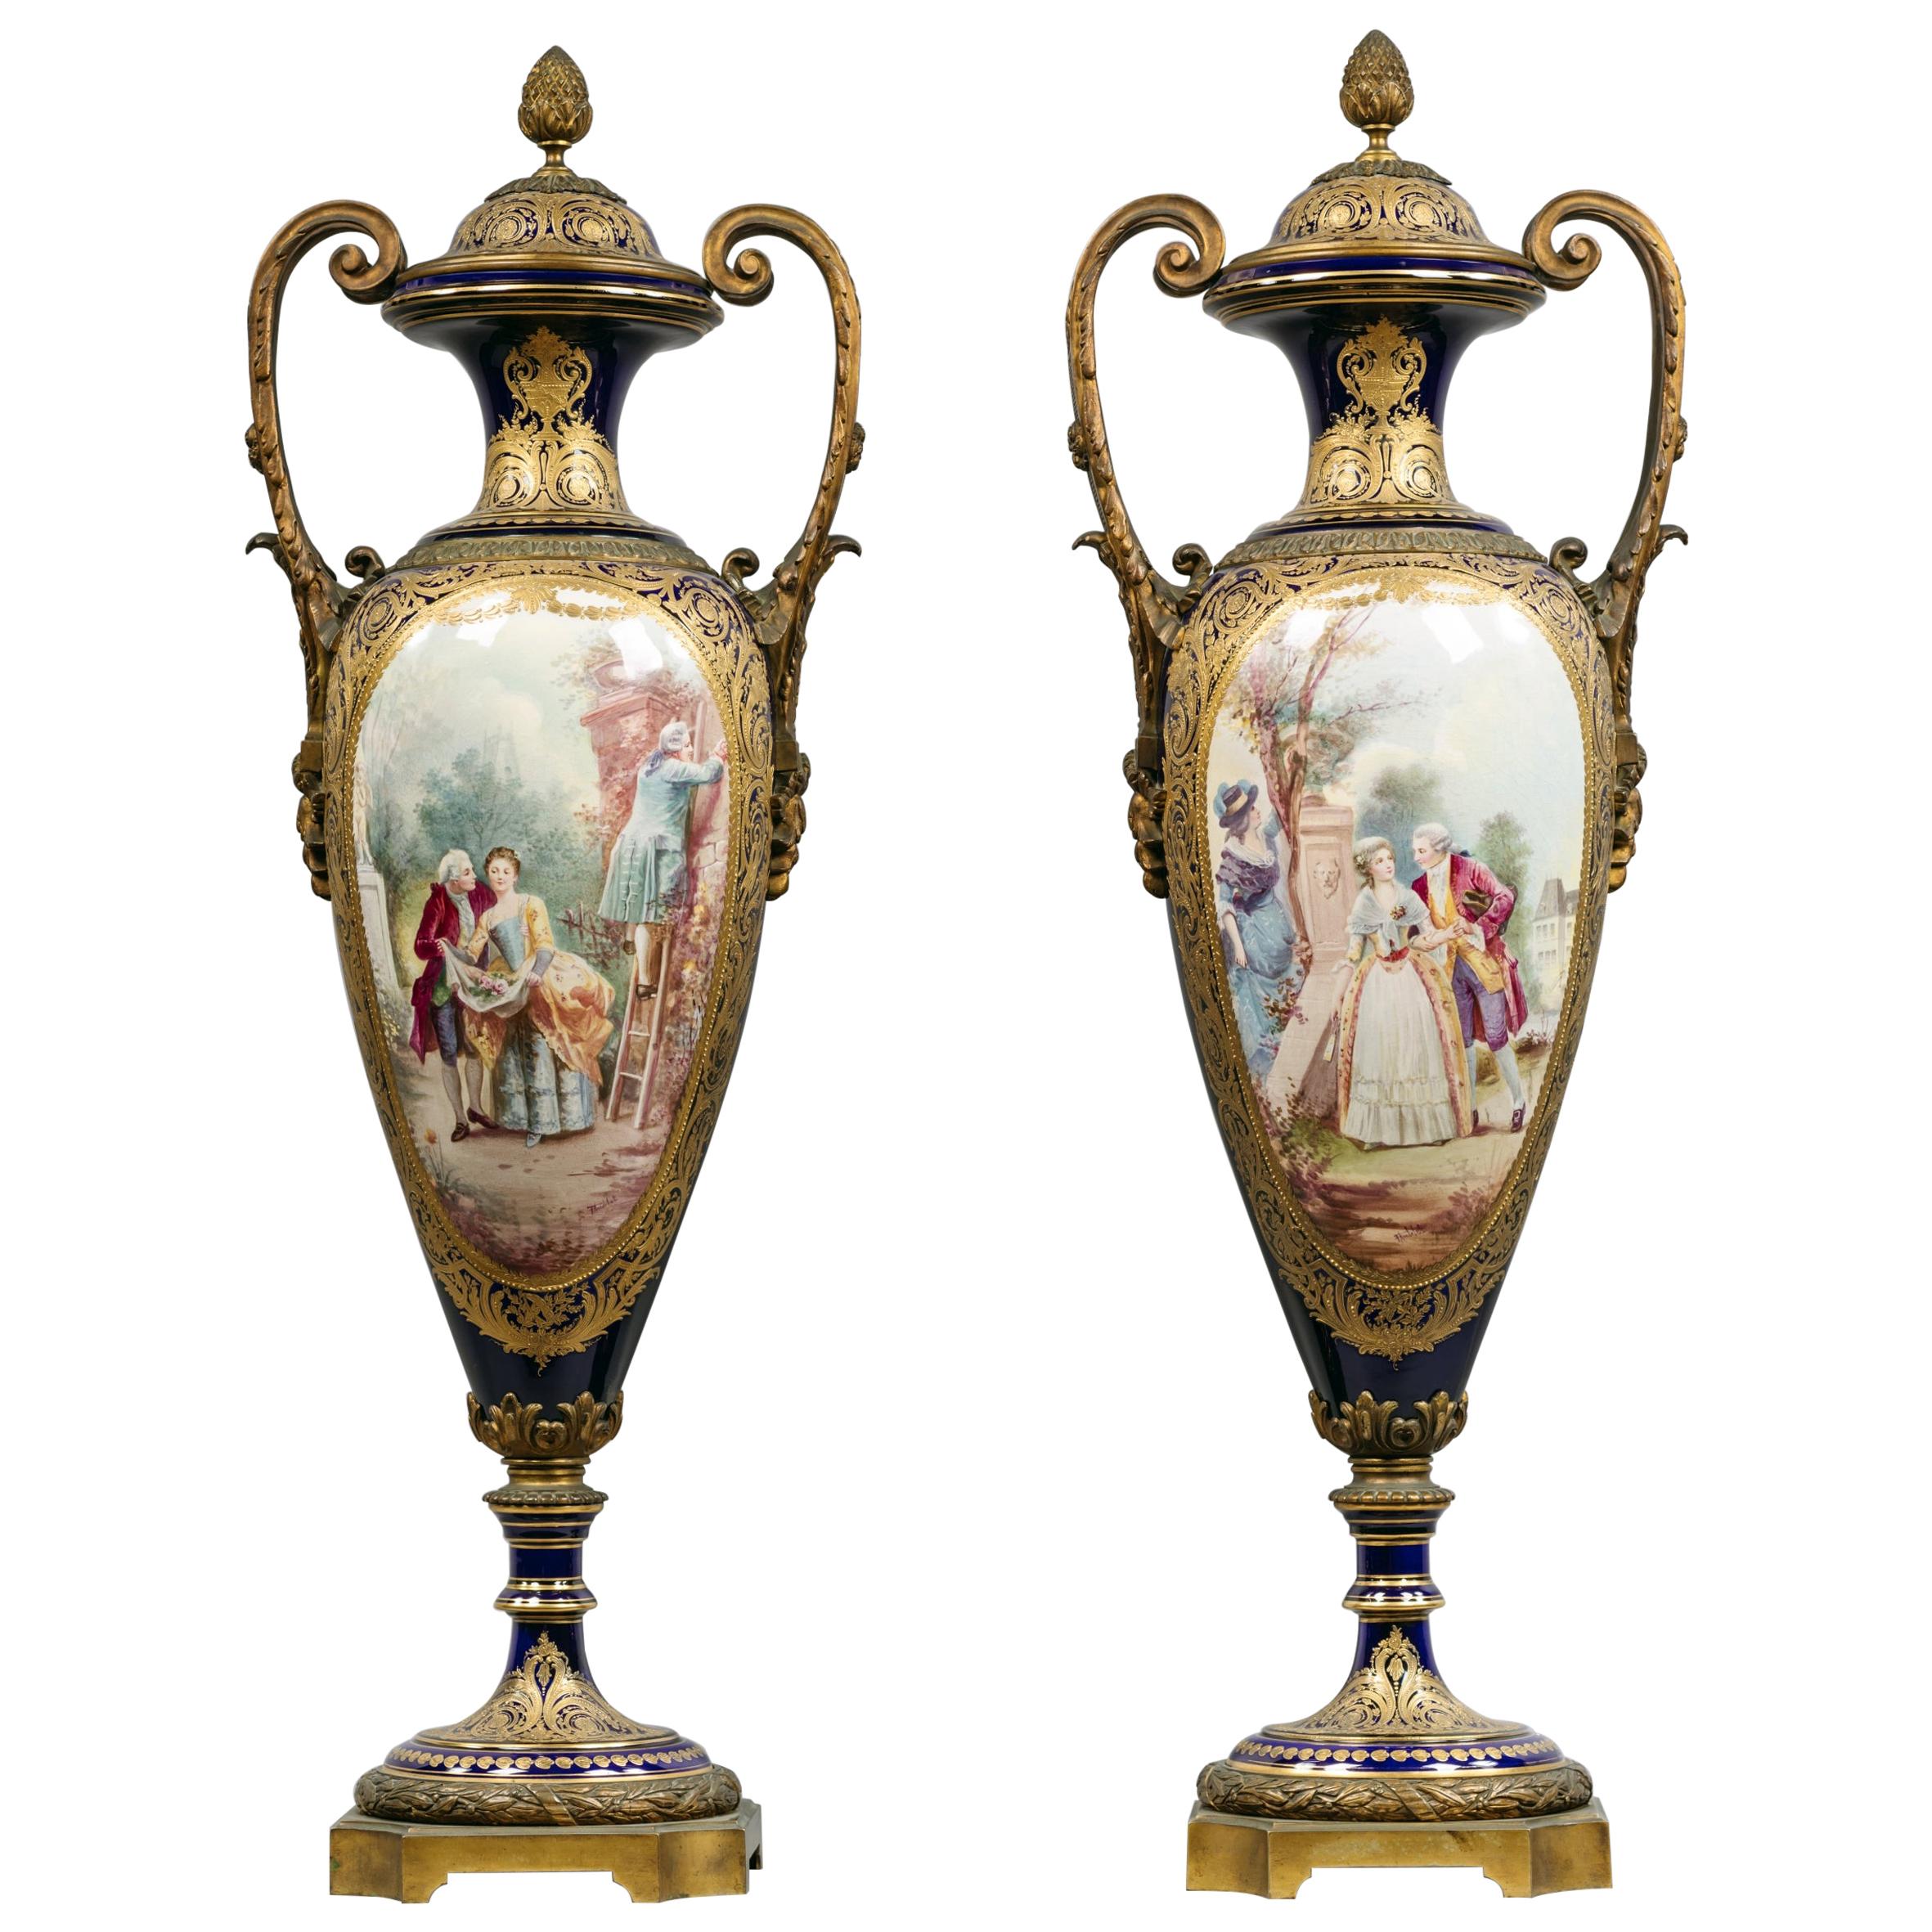 Pair of Gilt-Bronze Sèvres Style Porcelain Vases and Covers